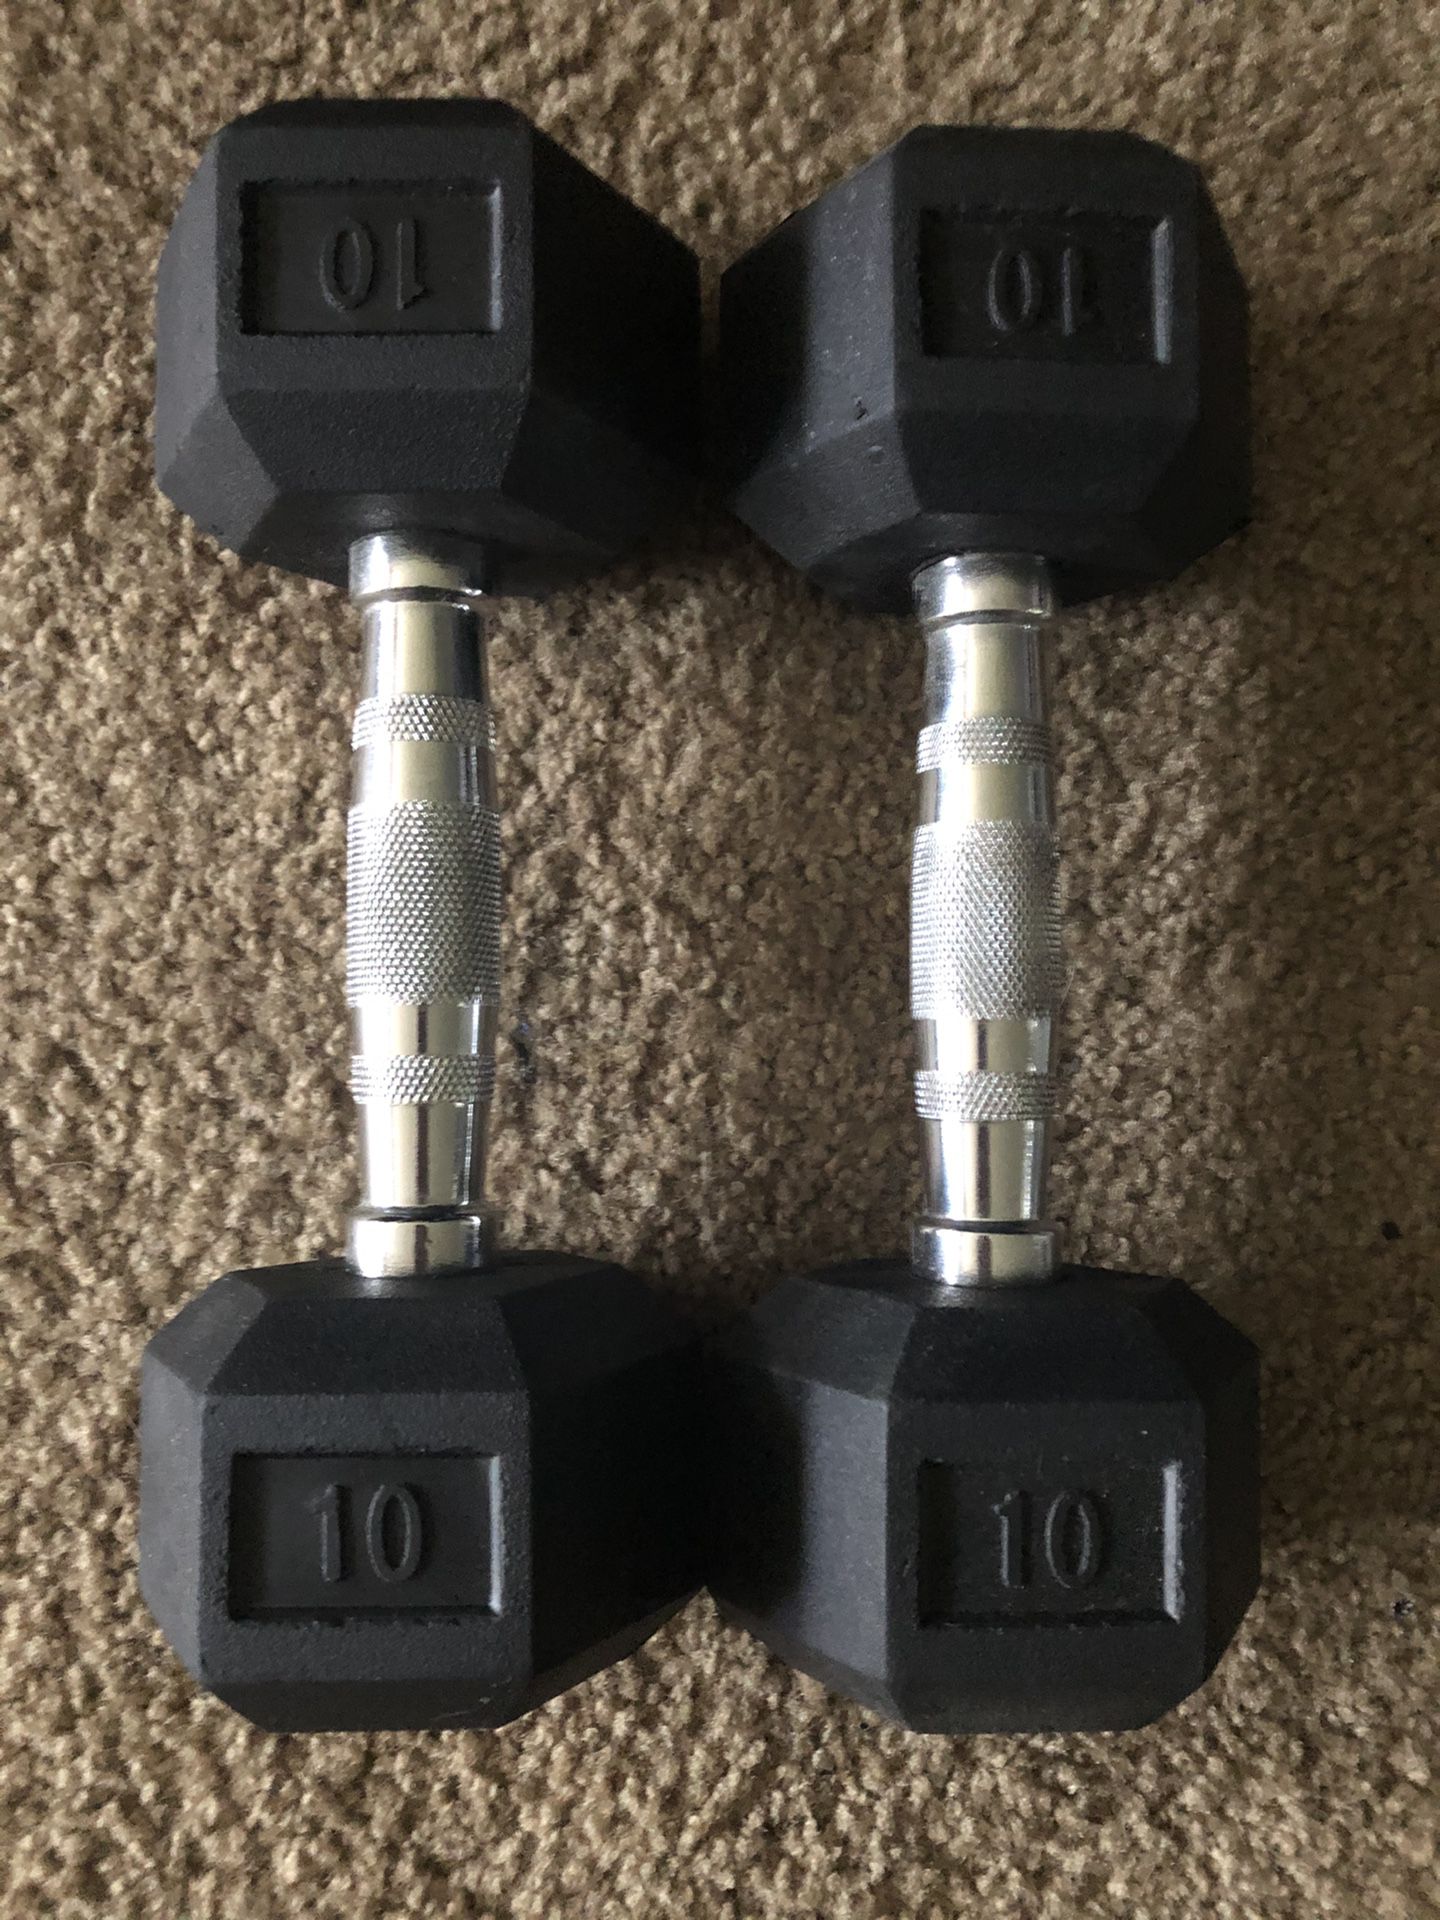 10 Pound dumbbells & weight plate workout equipment